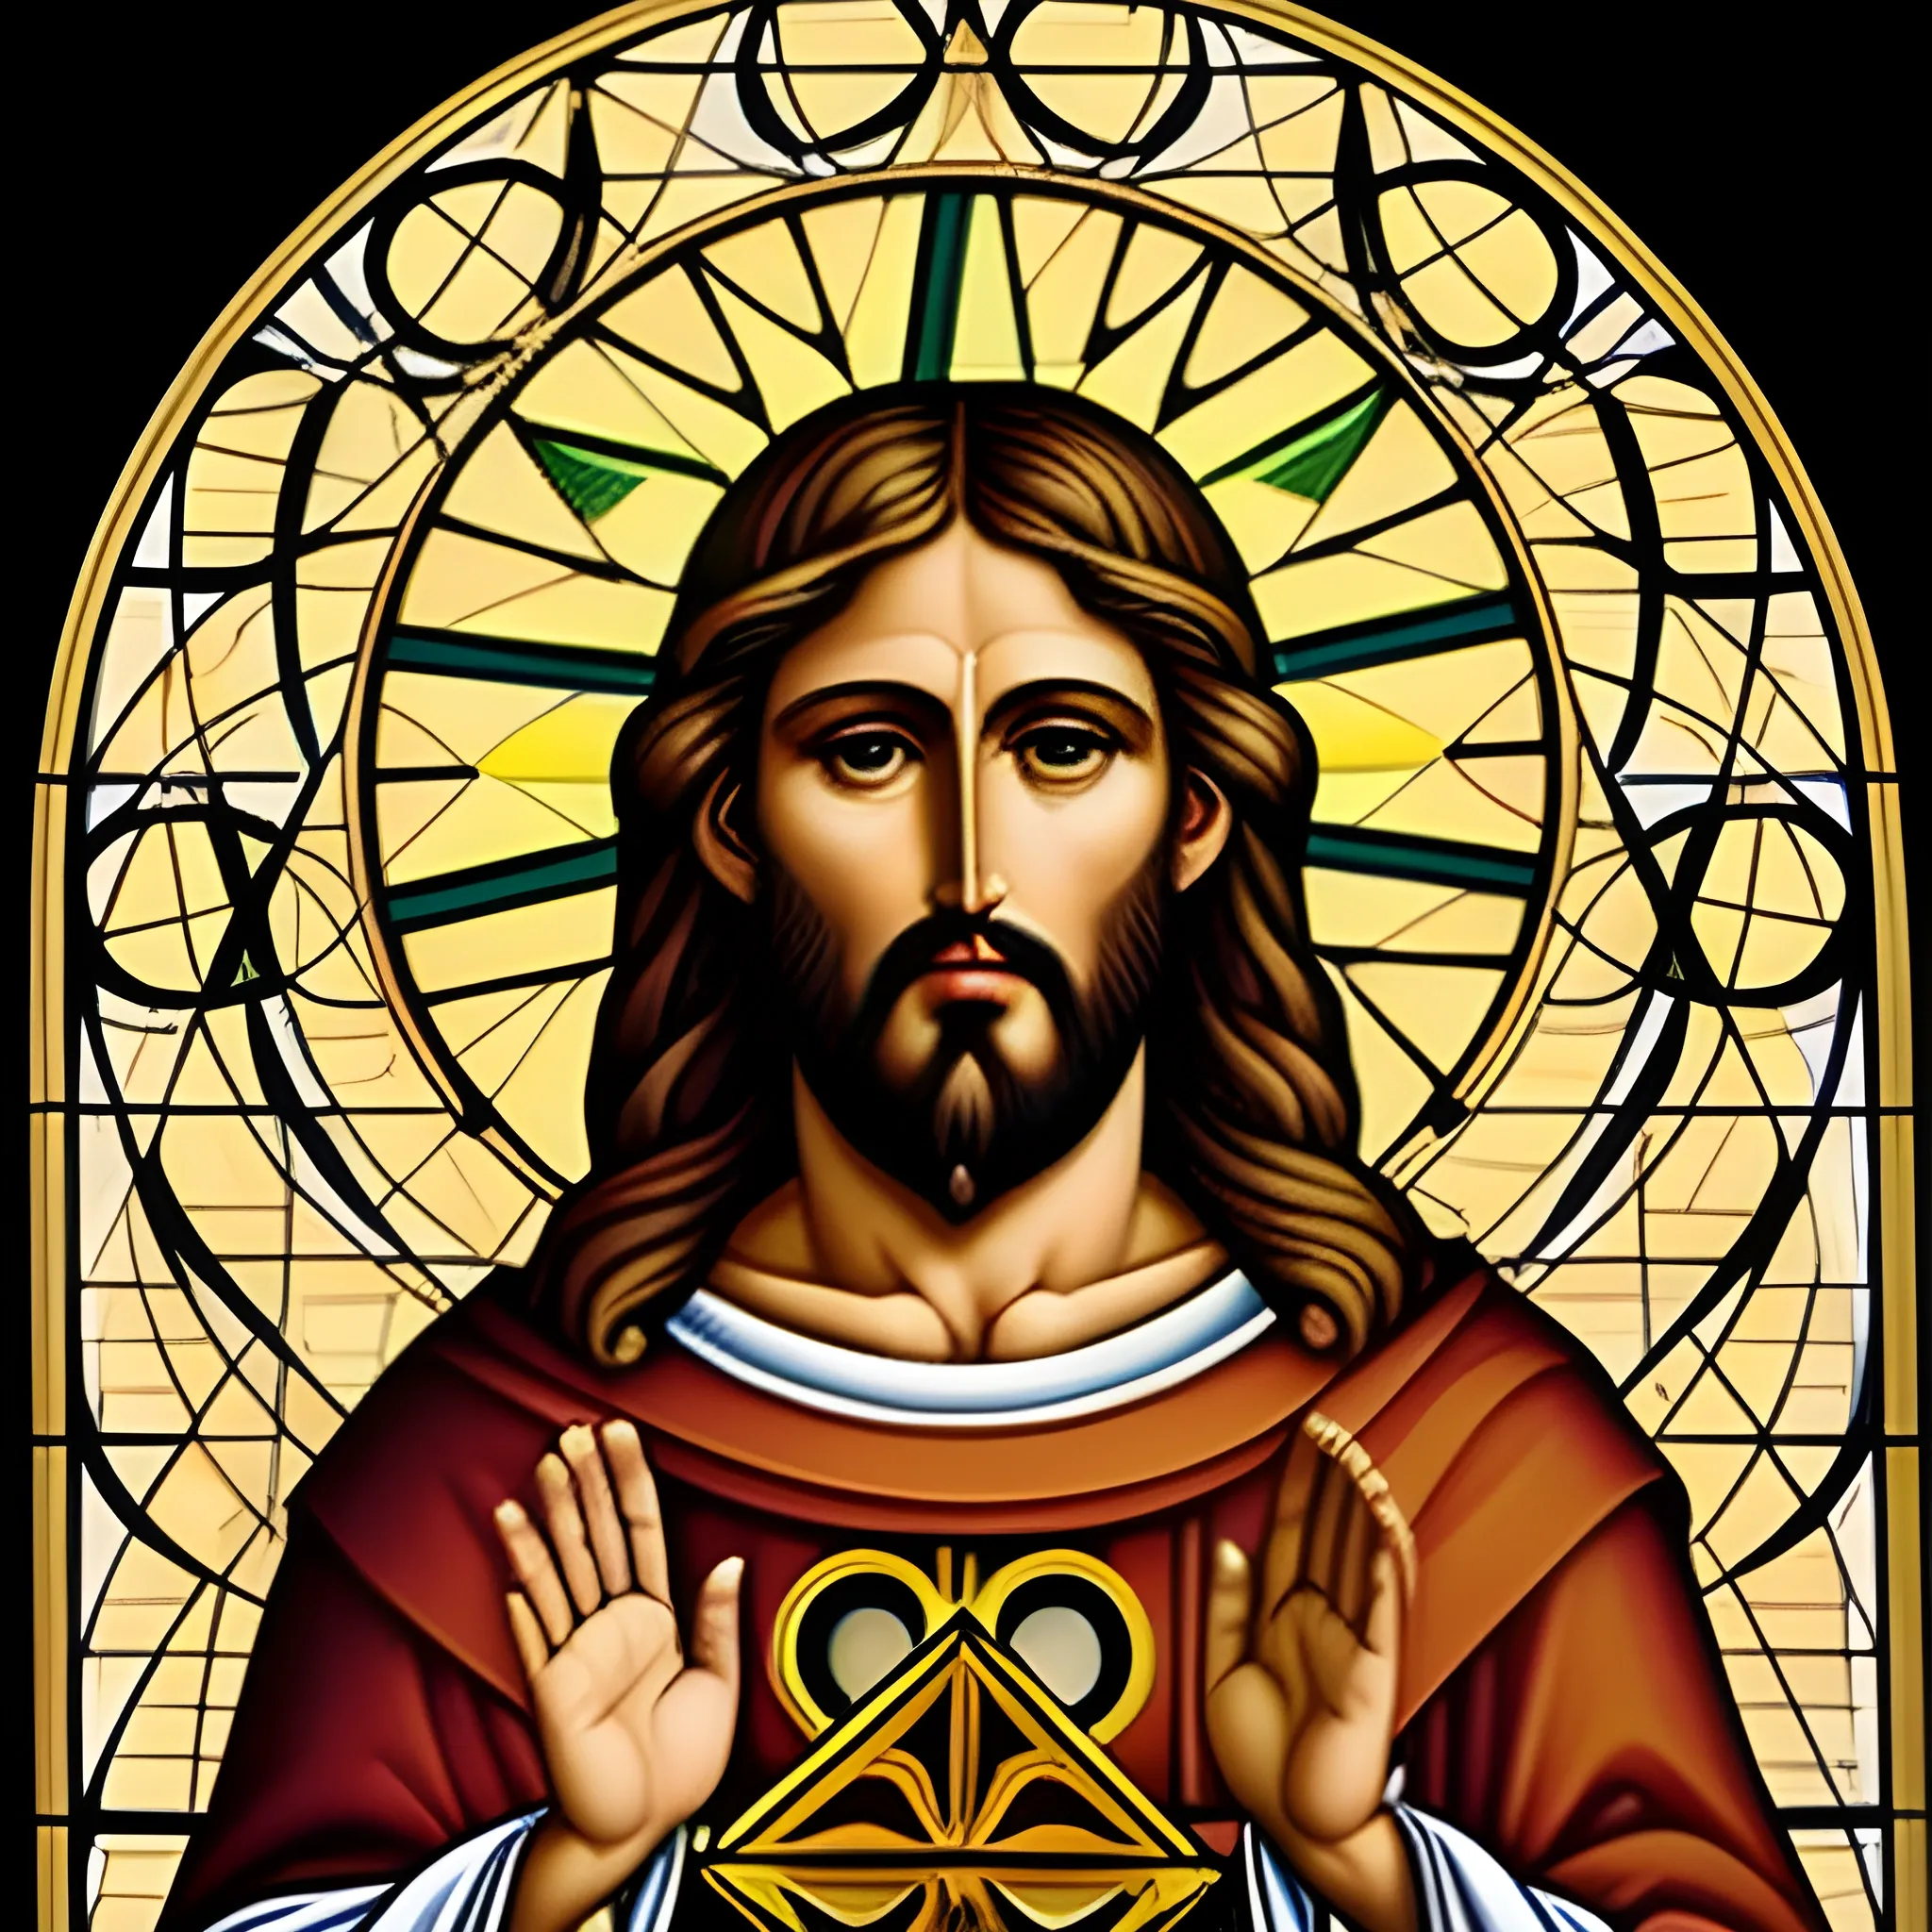 Jesus with SACRED GEOMETRY in the background

